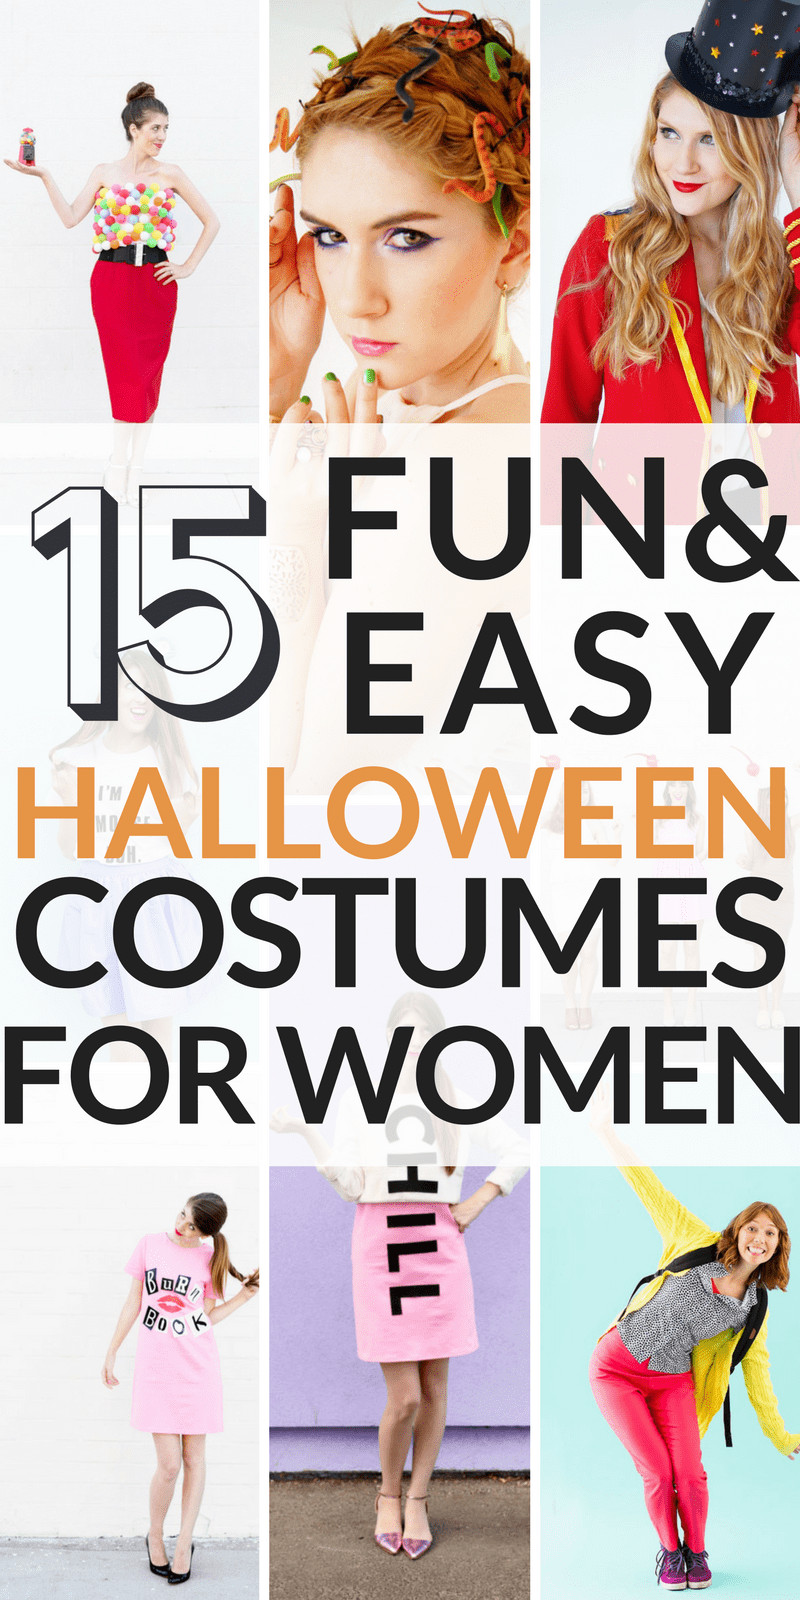 DIY Women Halloween Costumes
 15 Cheap and Easy DIY Halloween Costumes for Women